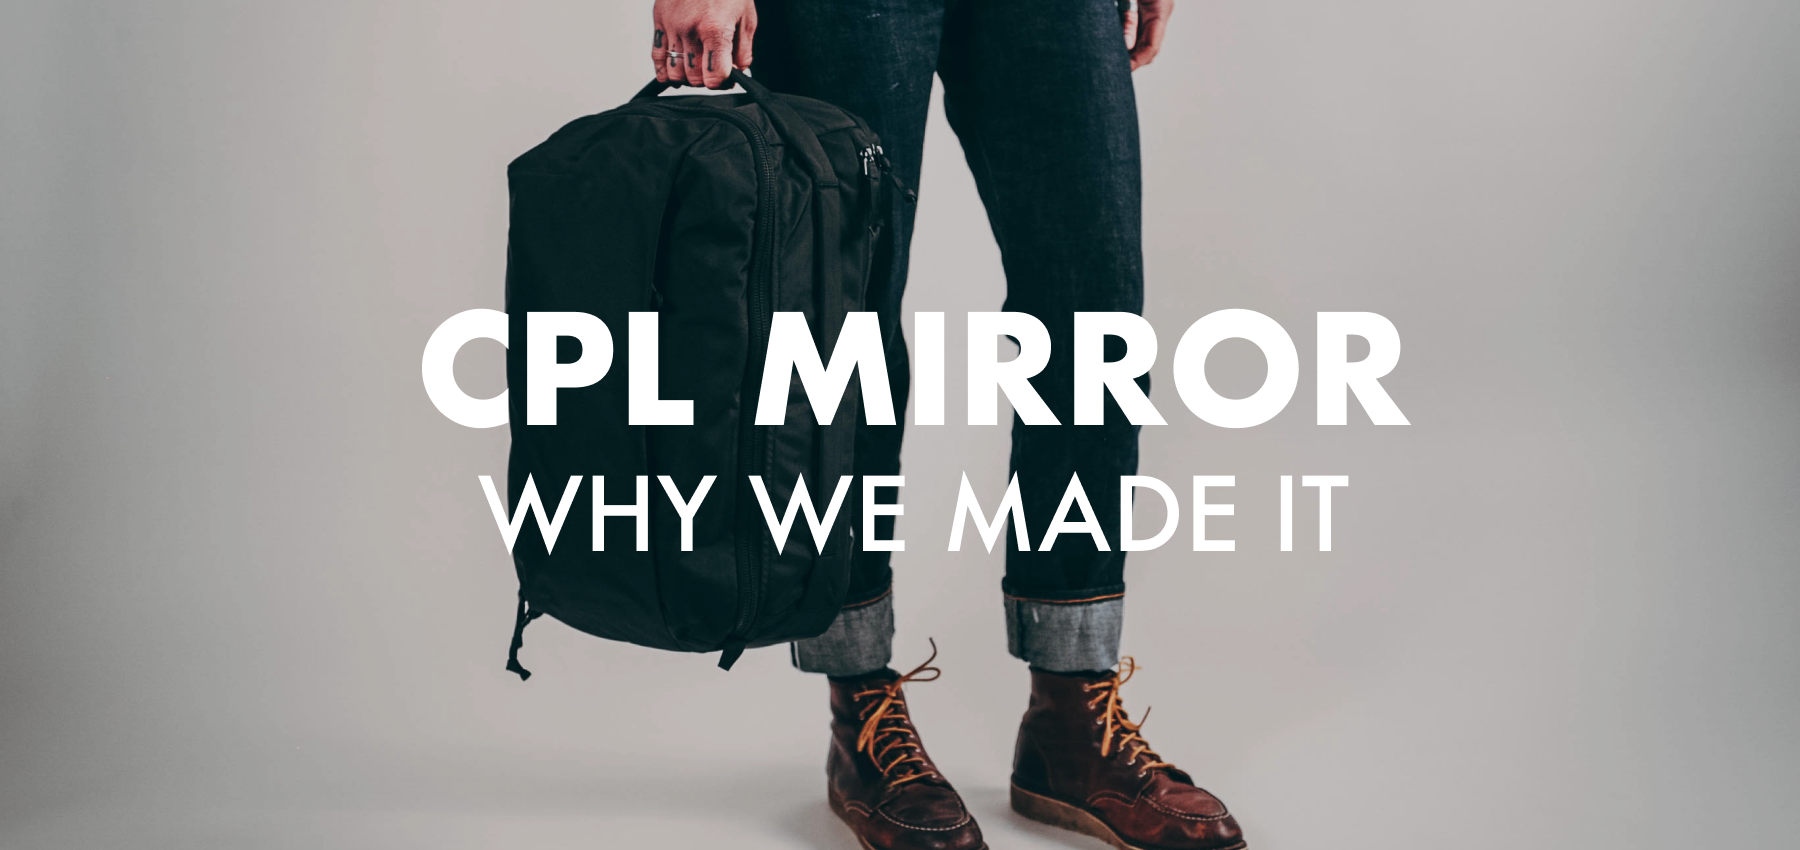 CPL MIRROR | WHY WE MADE IT